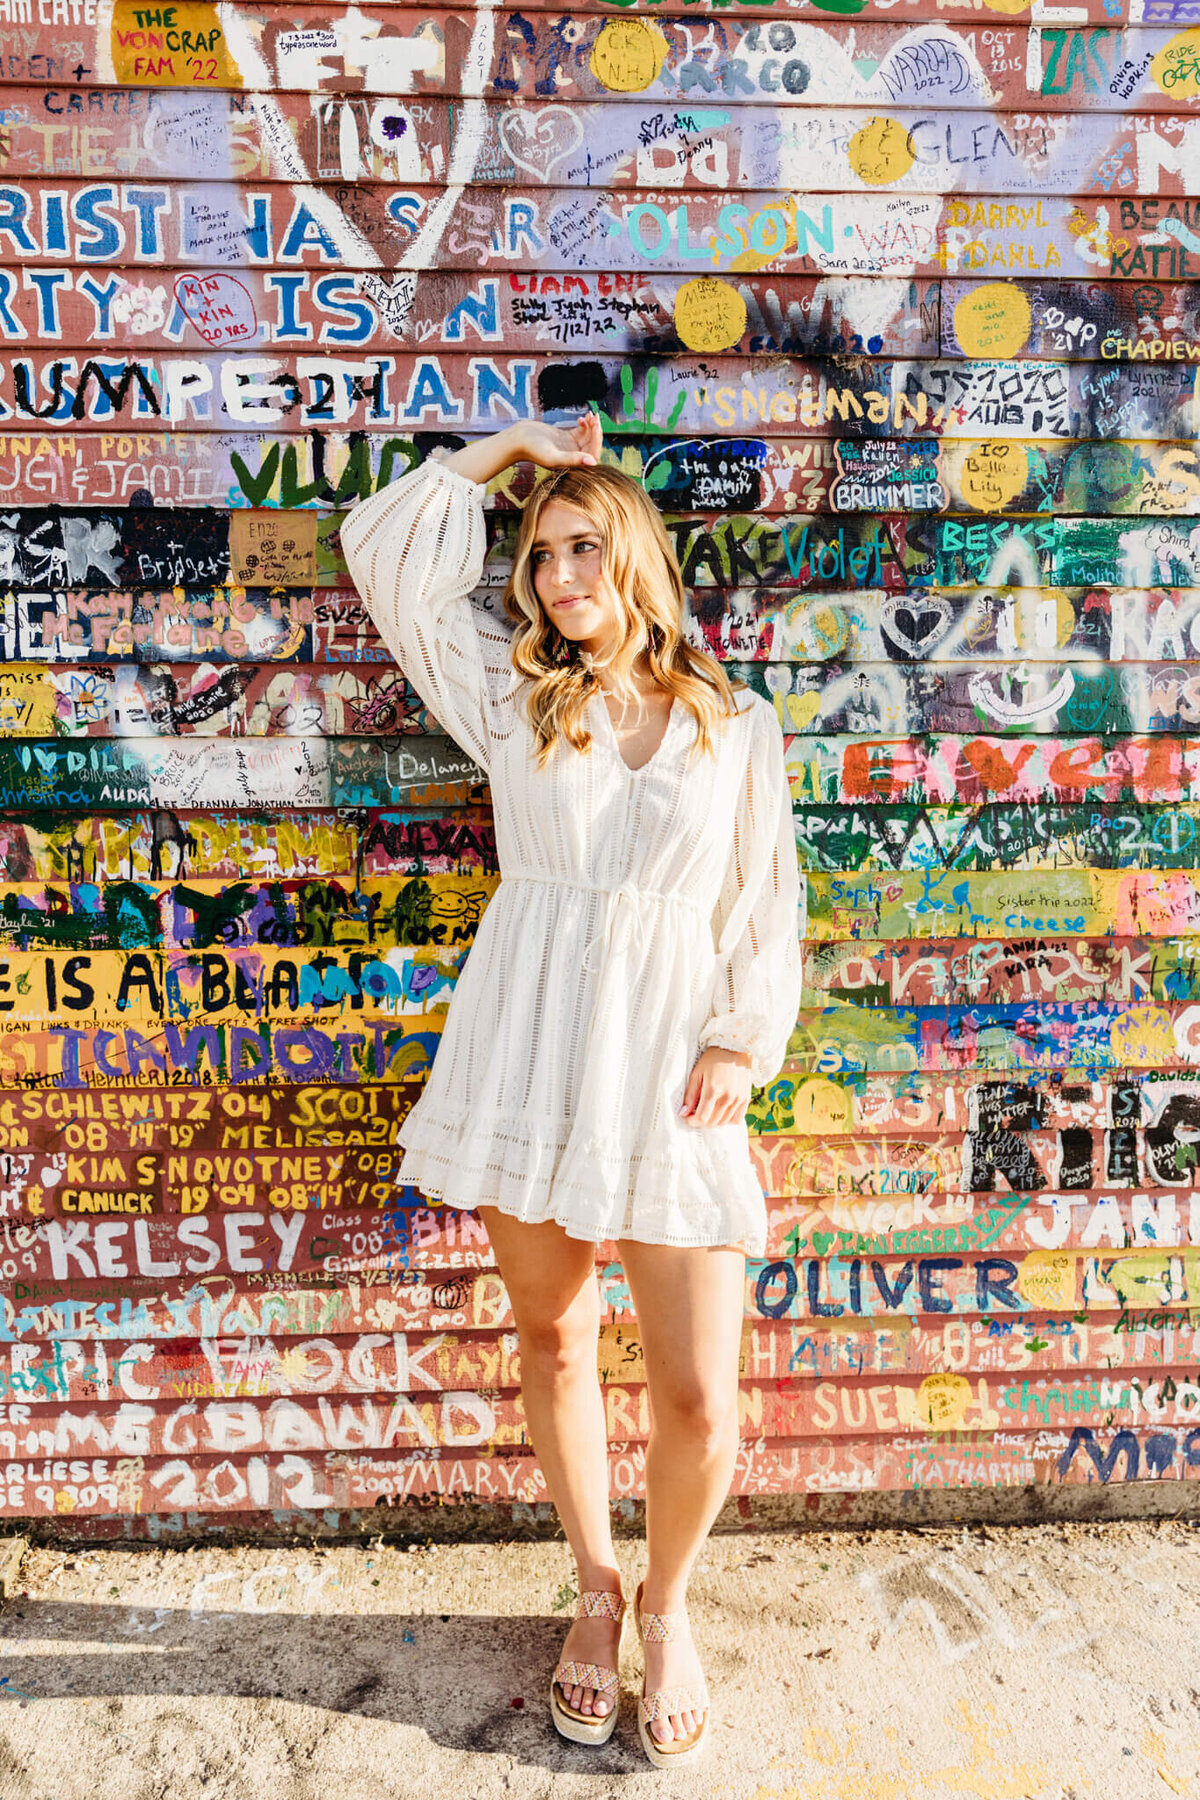 high school senior girl  leaning against a wall painted with names